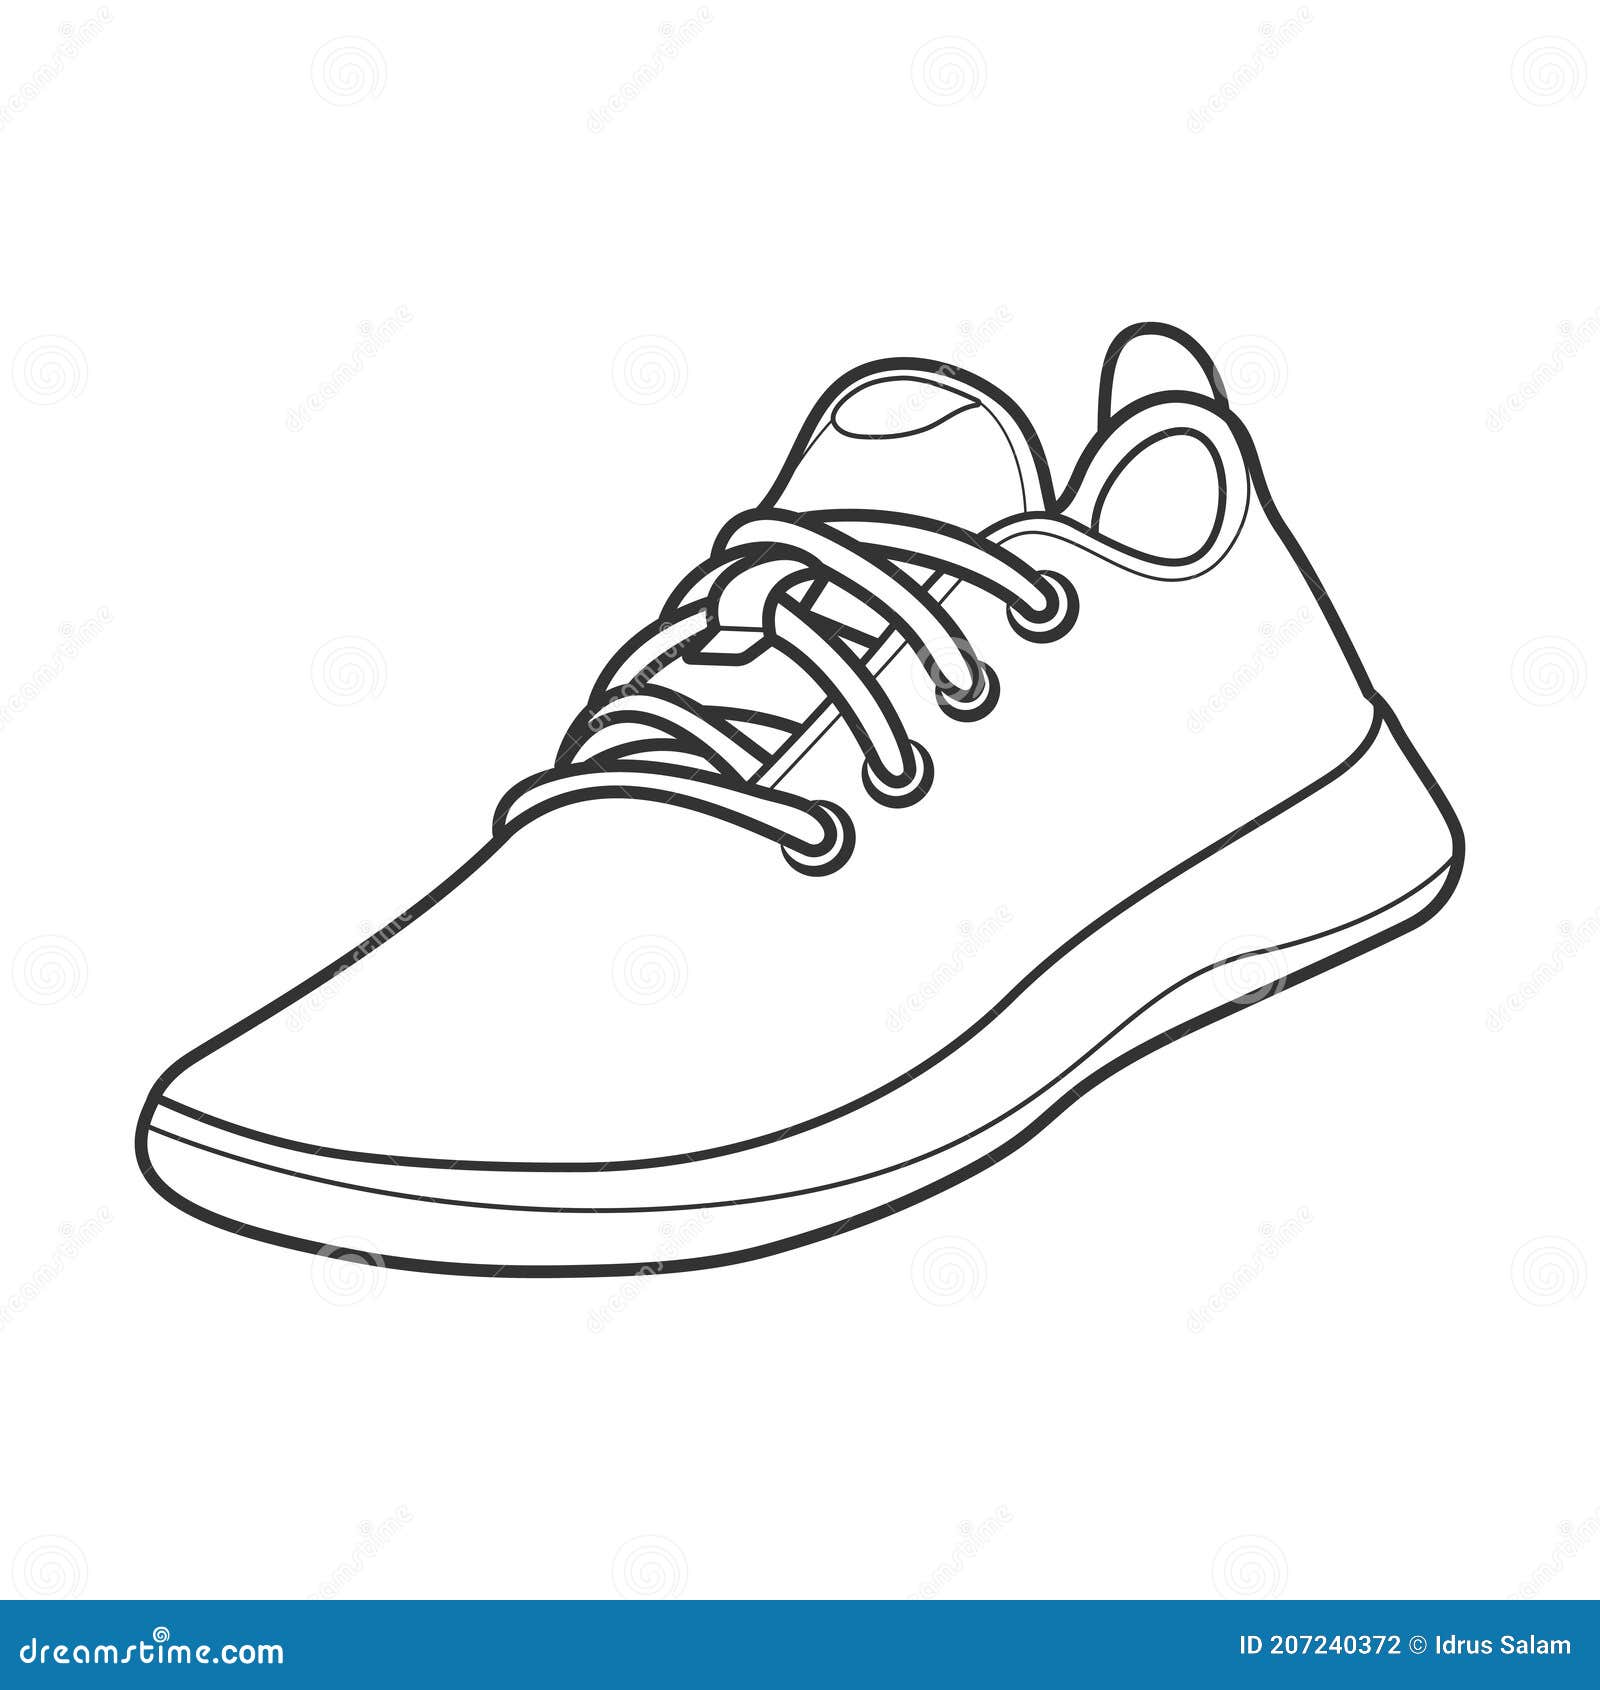 Shoes Sneaker Outline Drawing Vector Sneakers Stock Vector (Royalty Free)  1895937277 | Shutterstock